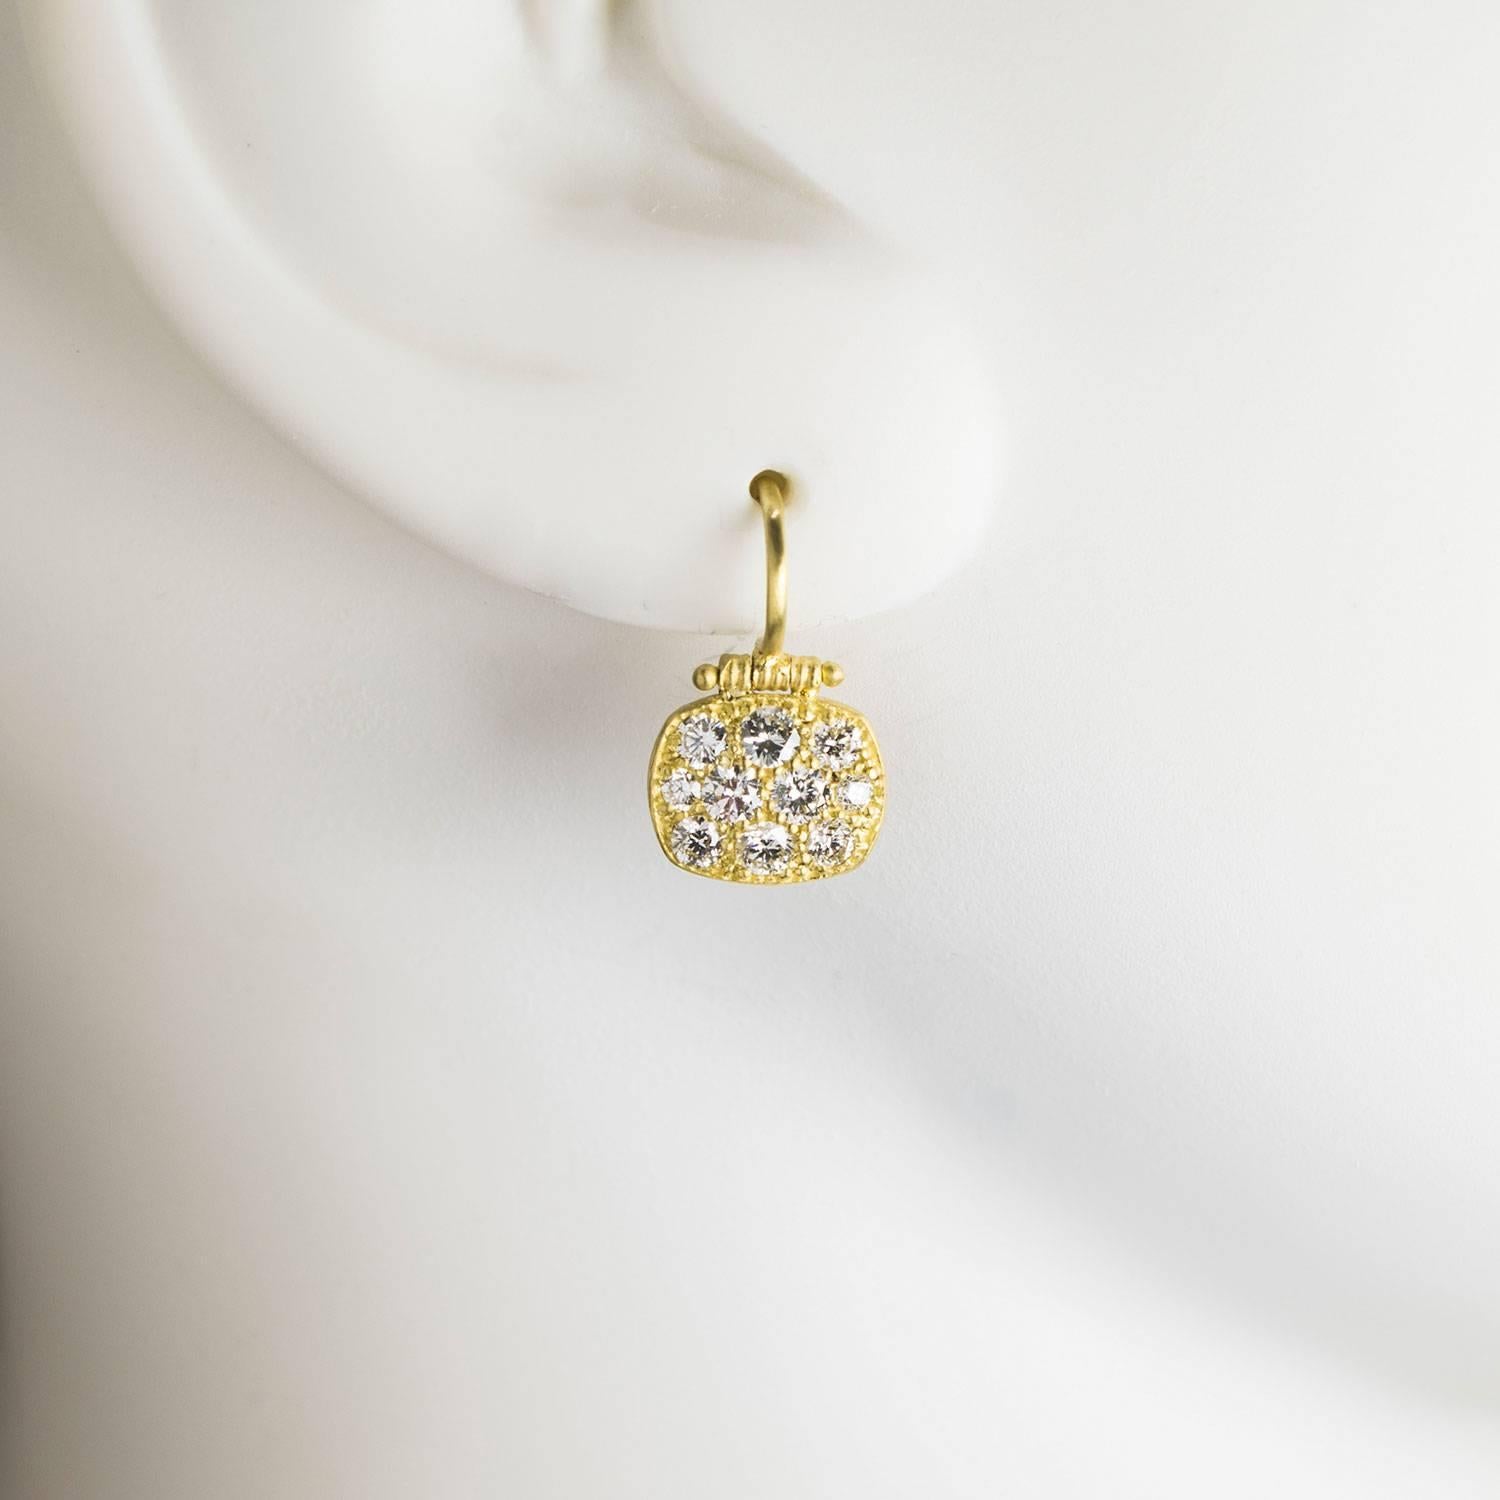 The hinge movement enhances the bright sparkle of the diamonds on these earrings. Handcrafted in 18k green* gold, ; the chicklet shape is aesthetically pleasing and very flattering. The perfect diamond drop earring! Total weight of diamonds 1.15